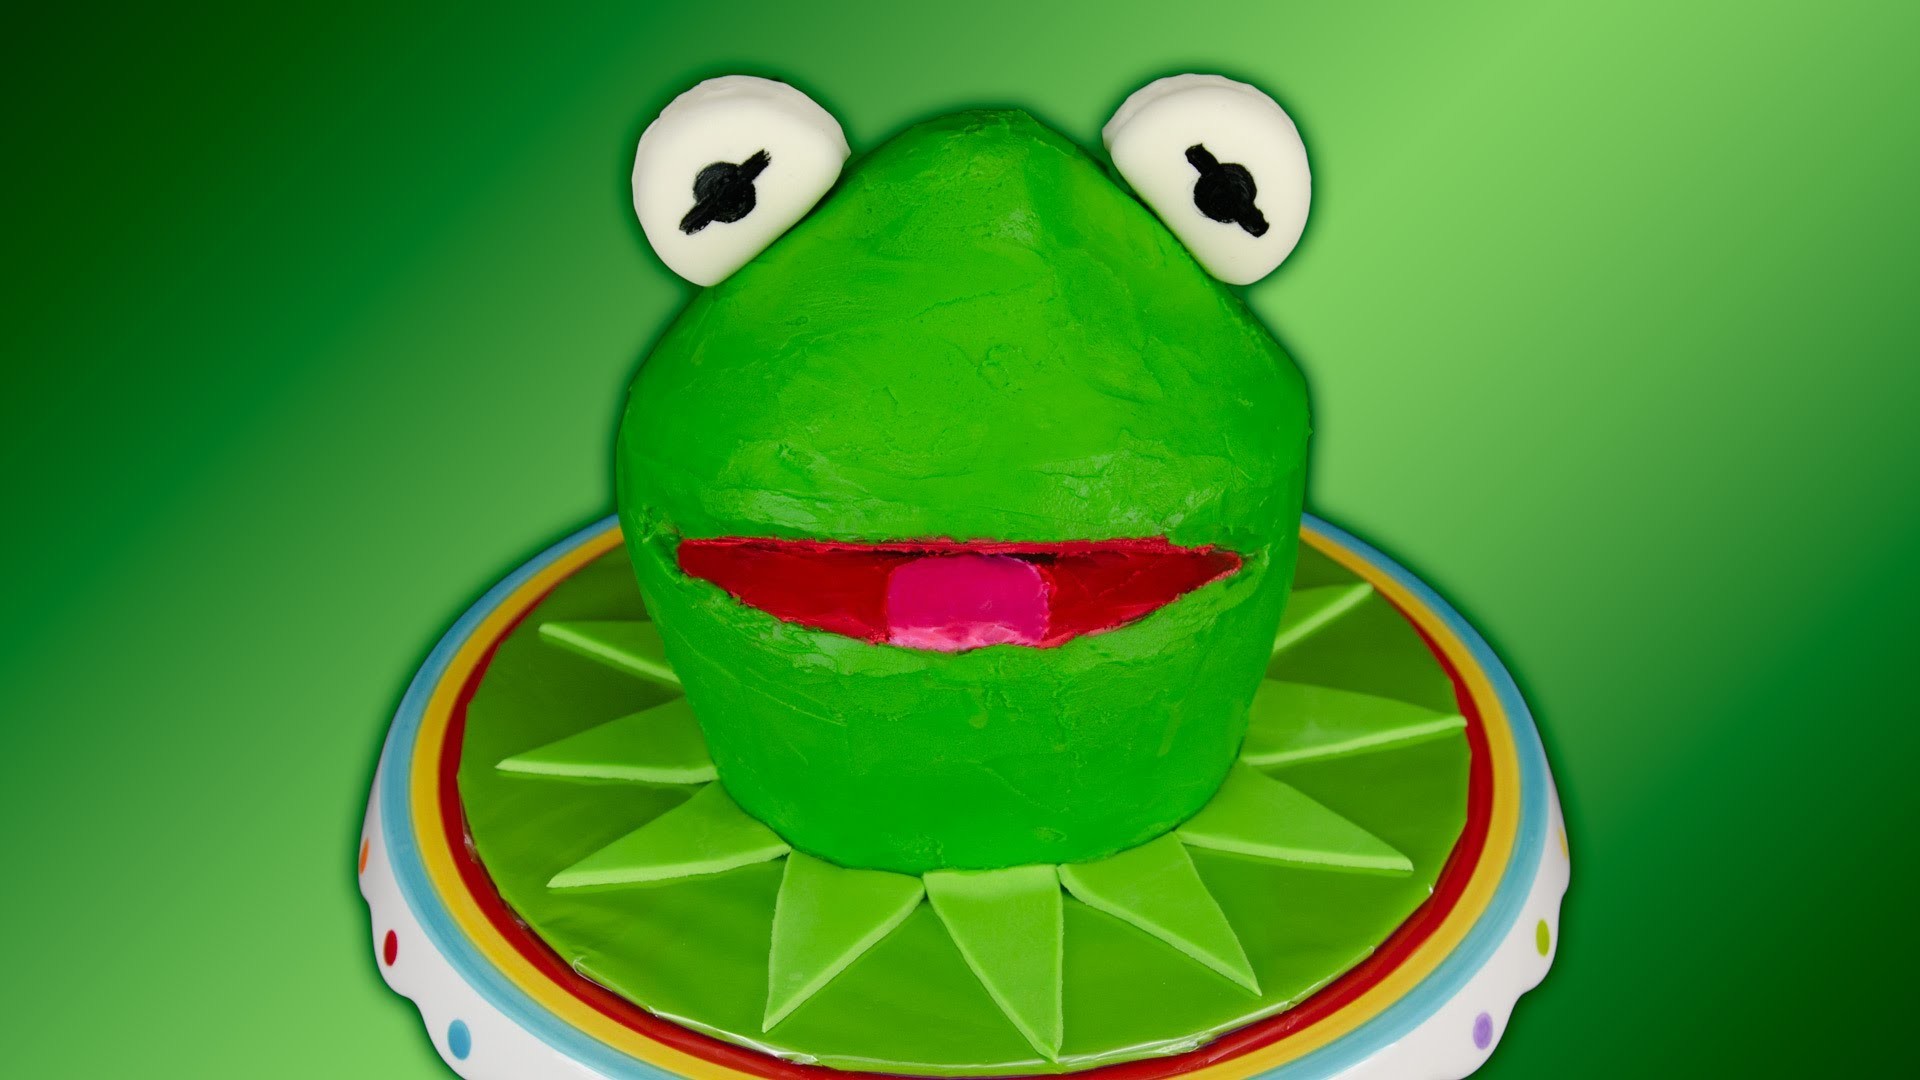 1920x1080 Kermit the Frog Cake / Muppets Cake using Green Velvet Cake by Cookies  Cupcakes and Cardio - YouTube